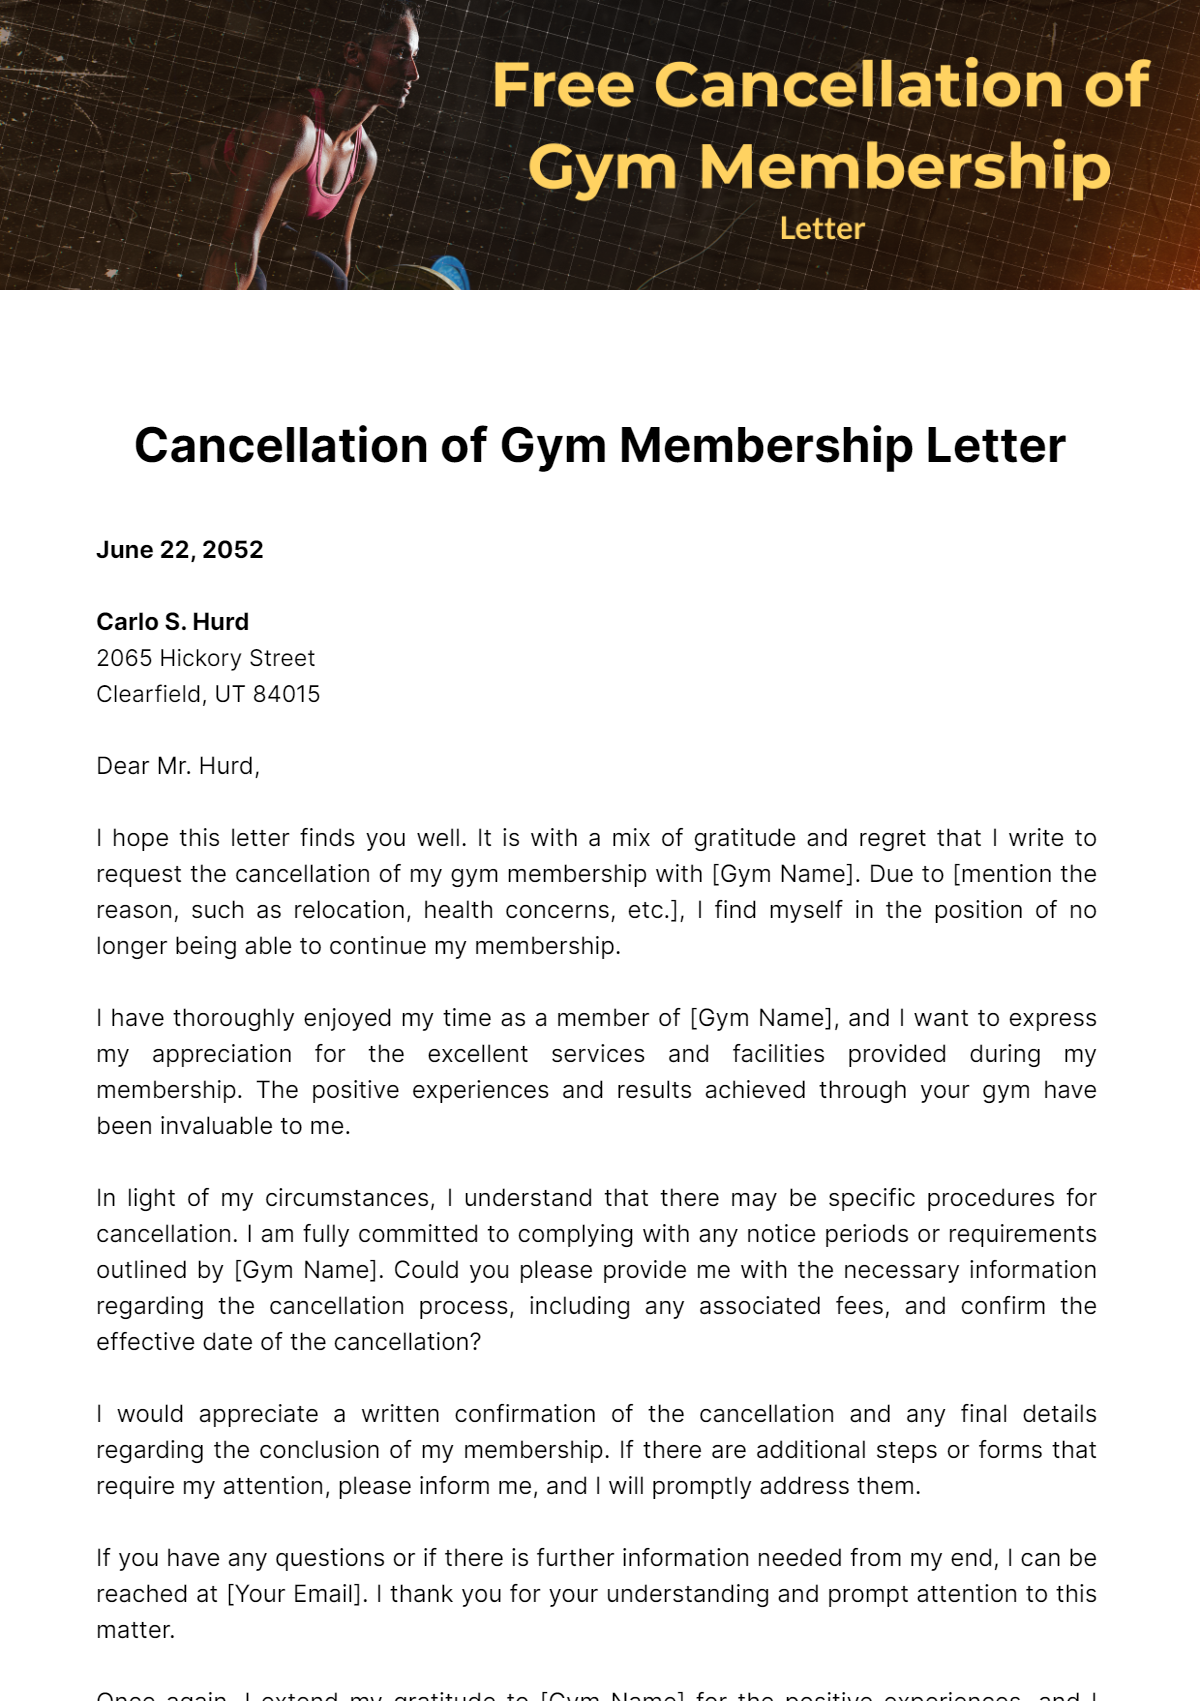 Free Cancellation of Gym Membership Letter Template